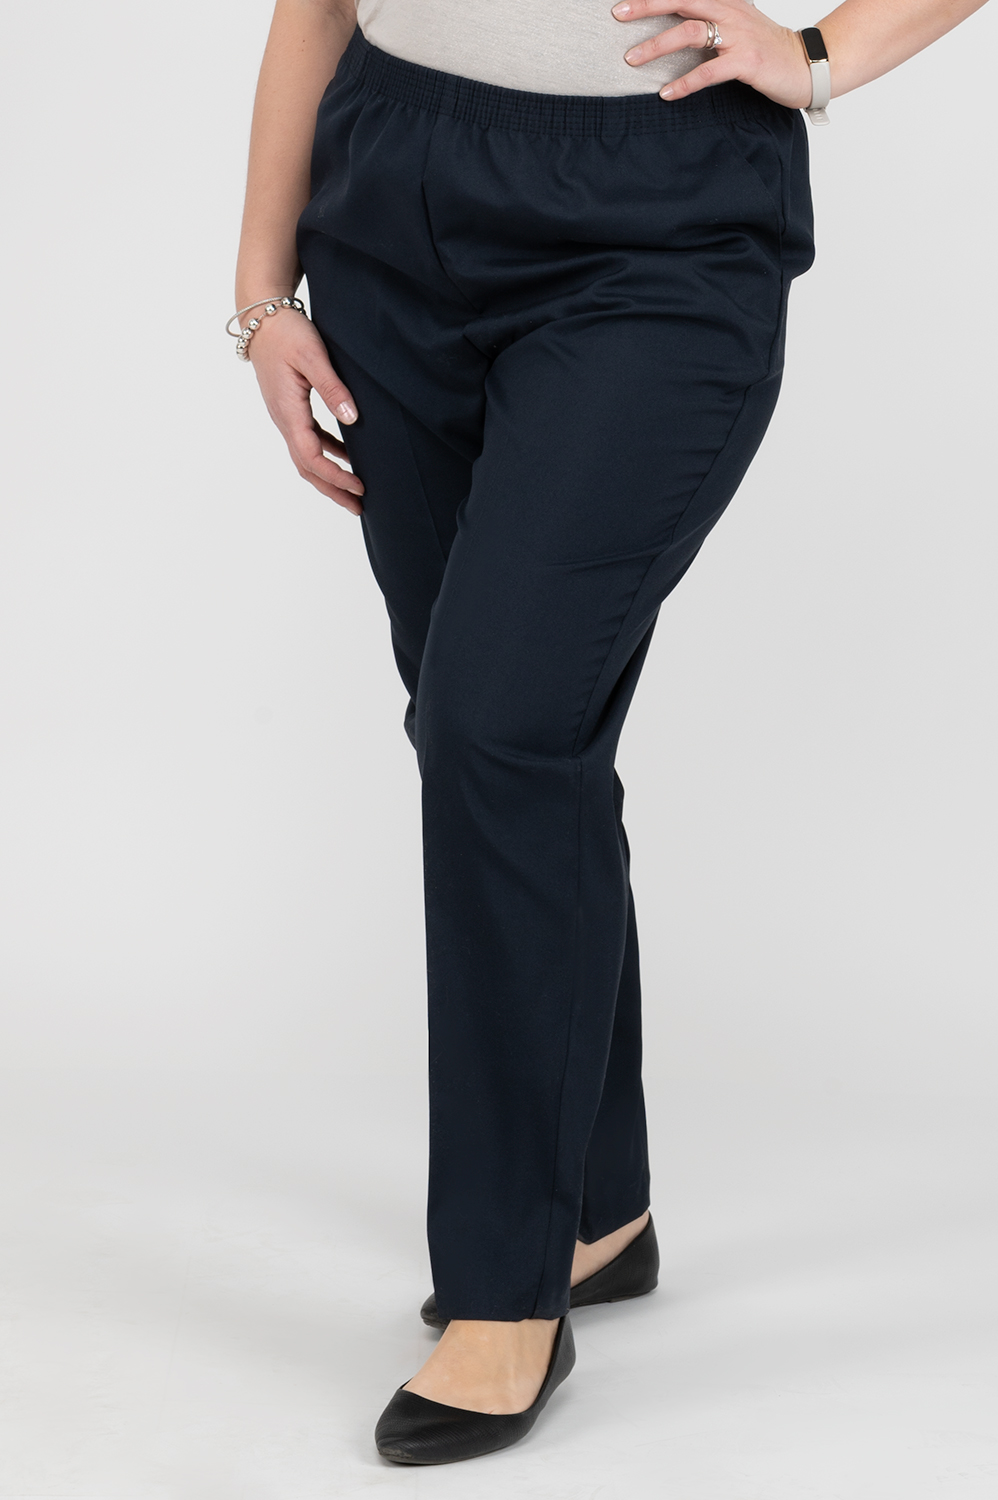 https://www.rossy.ca/media/A2W/products/pantalon-a-enfiler-avec-taille-elastique-marine-taille-plus-74313-3.jpg